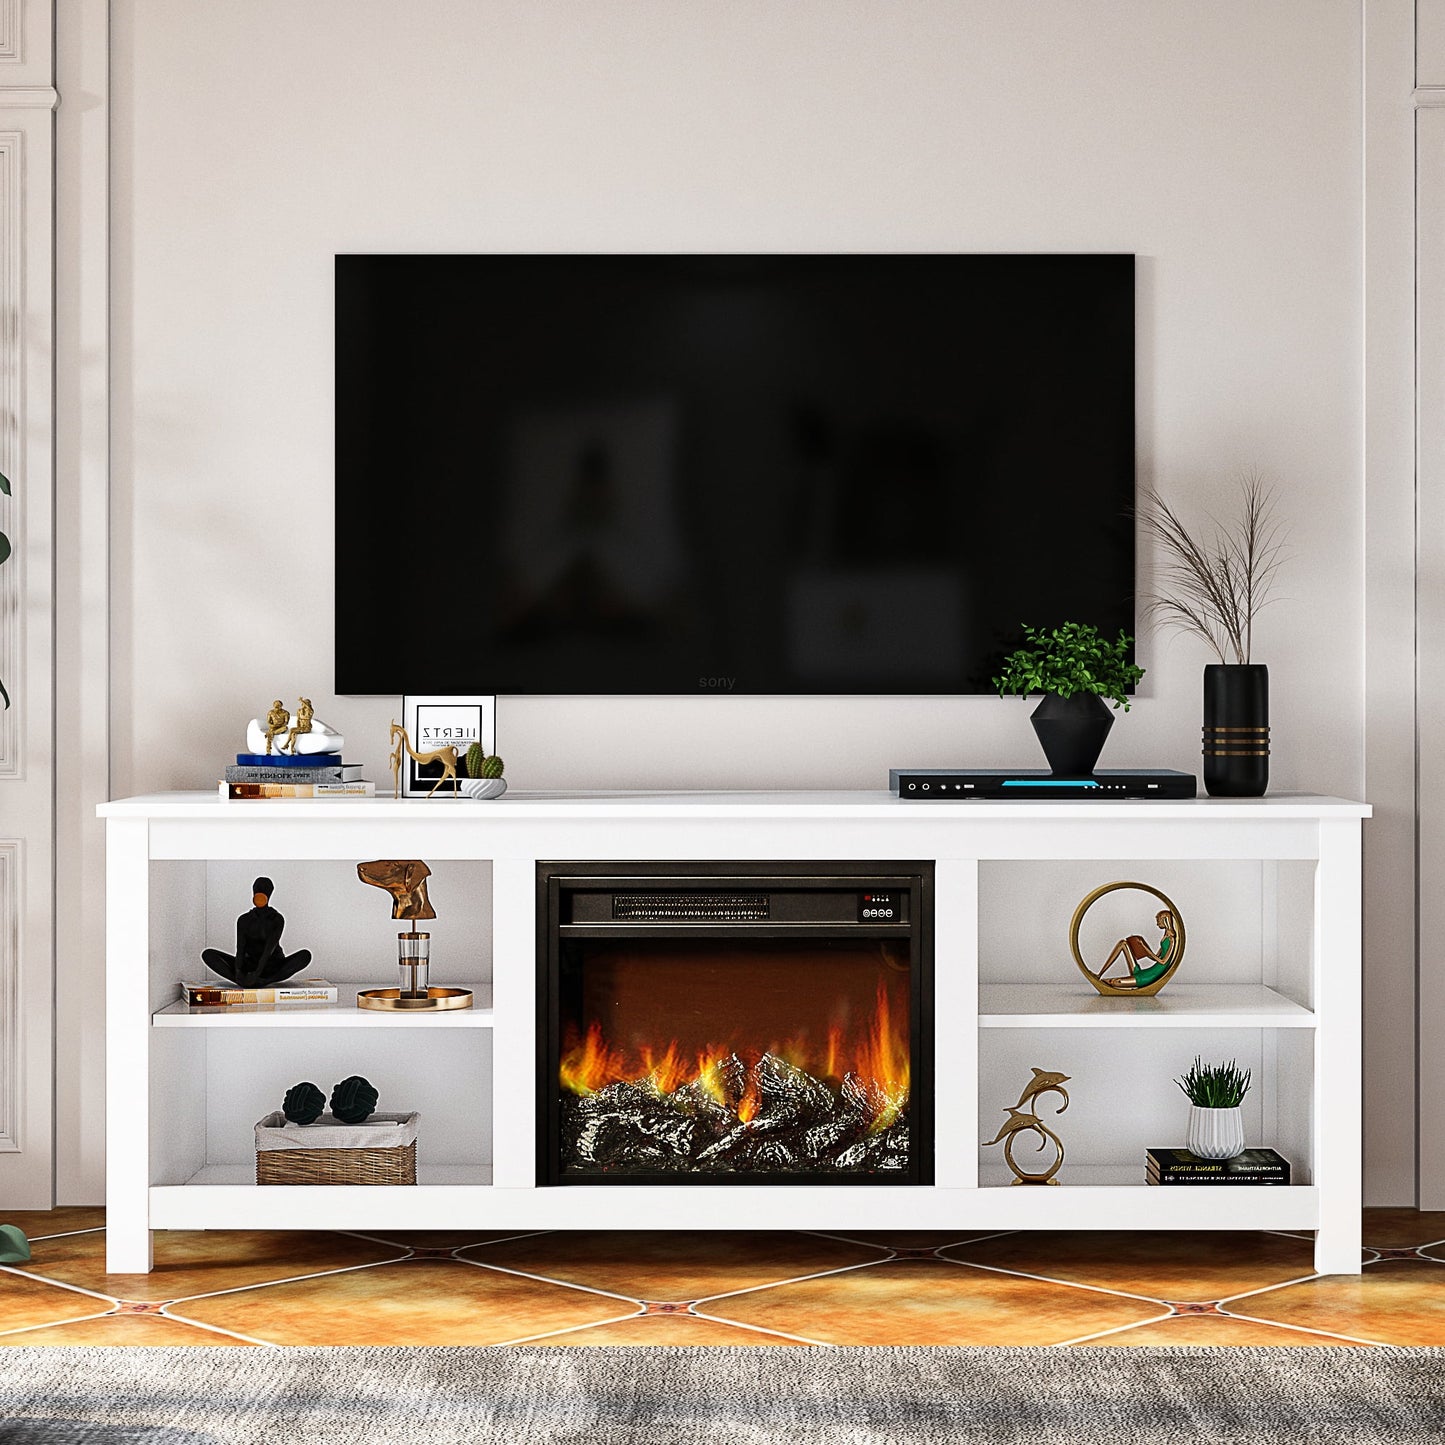 SYNGAR Fireplace TV Stand for TVs to 65 inch, TV Cabinet with Storage and Fireplace, Modern TV Stand for Living Room, Bedroom, Entertainment Console Cabinet, Espresso, D3188